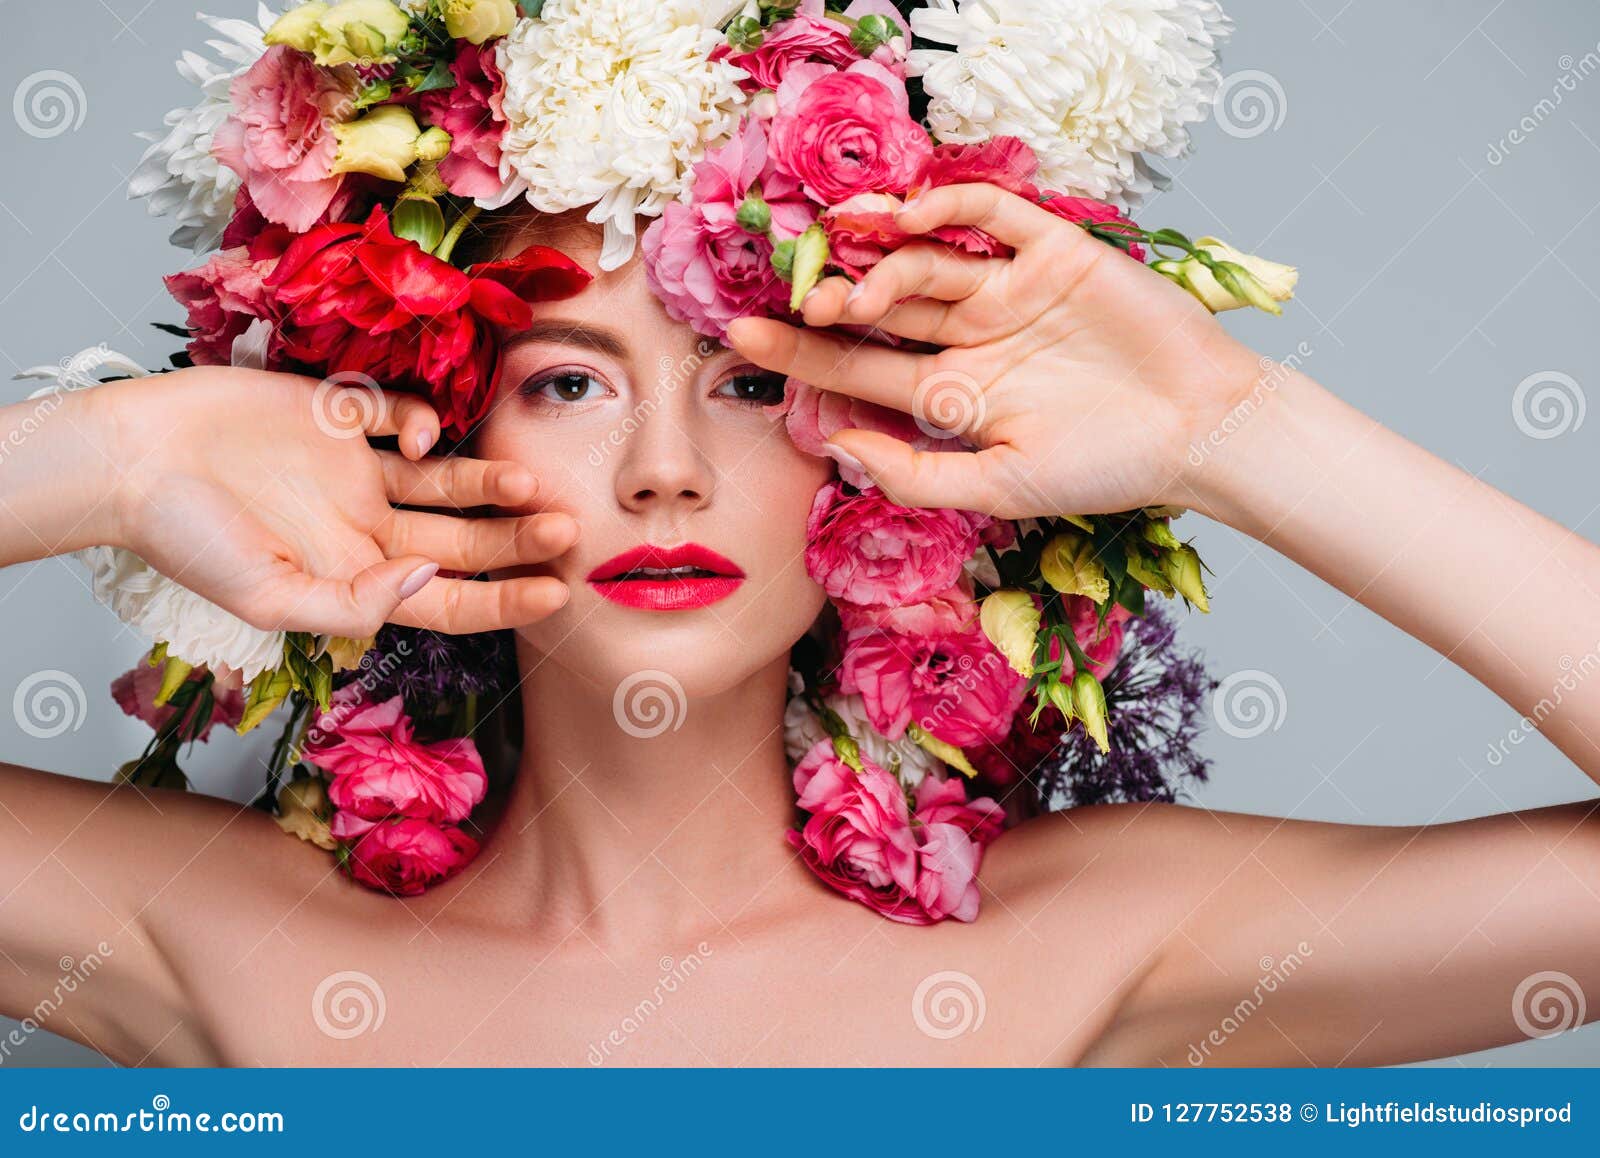 Beautiful Young Naked Woman In Floral Wreath Looking At Camera Stock